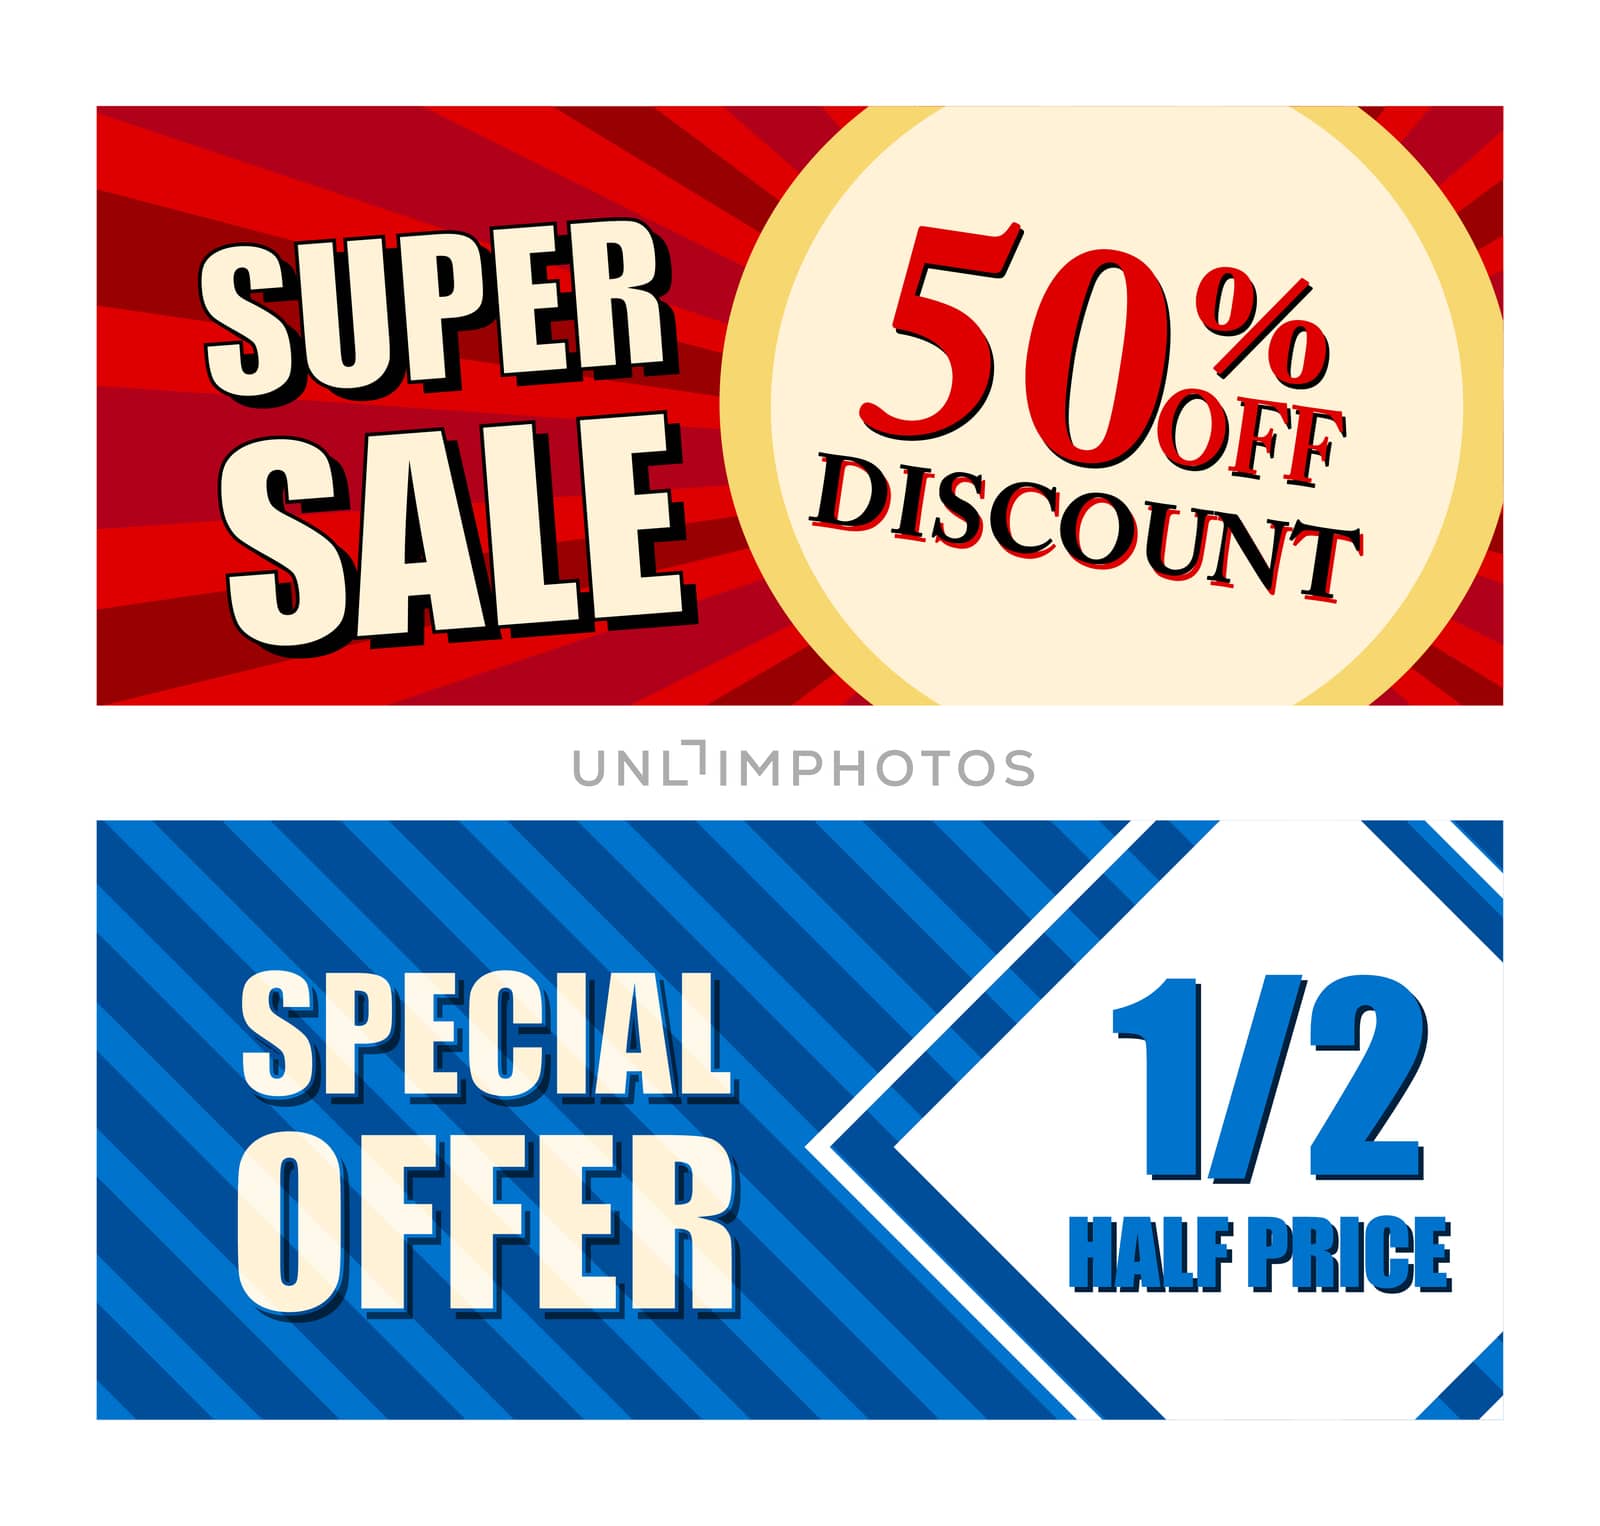 50 percent off discount super sale and special offer half price text banners, two vouchers labels, business commerce shopping concept